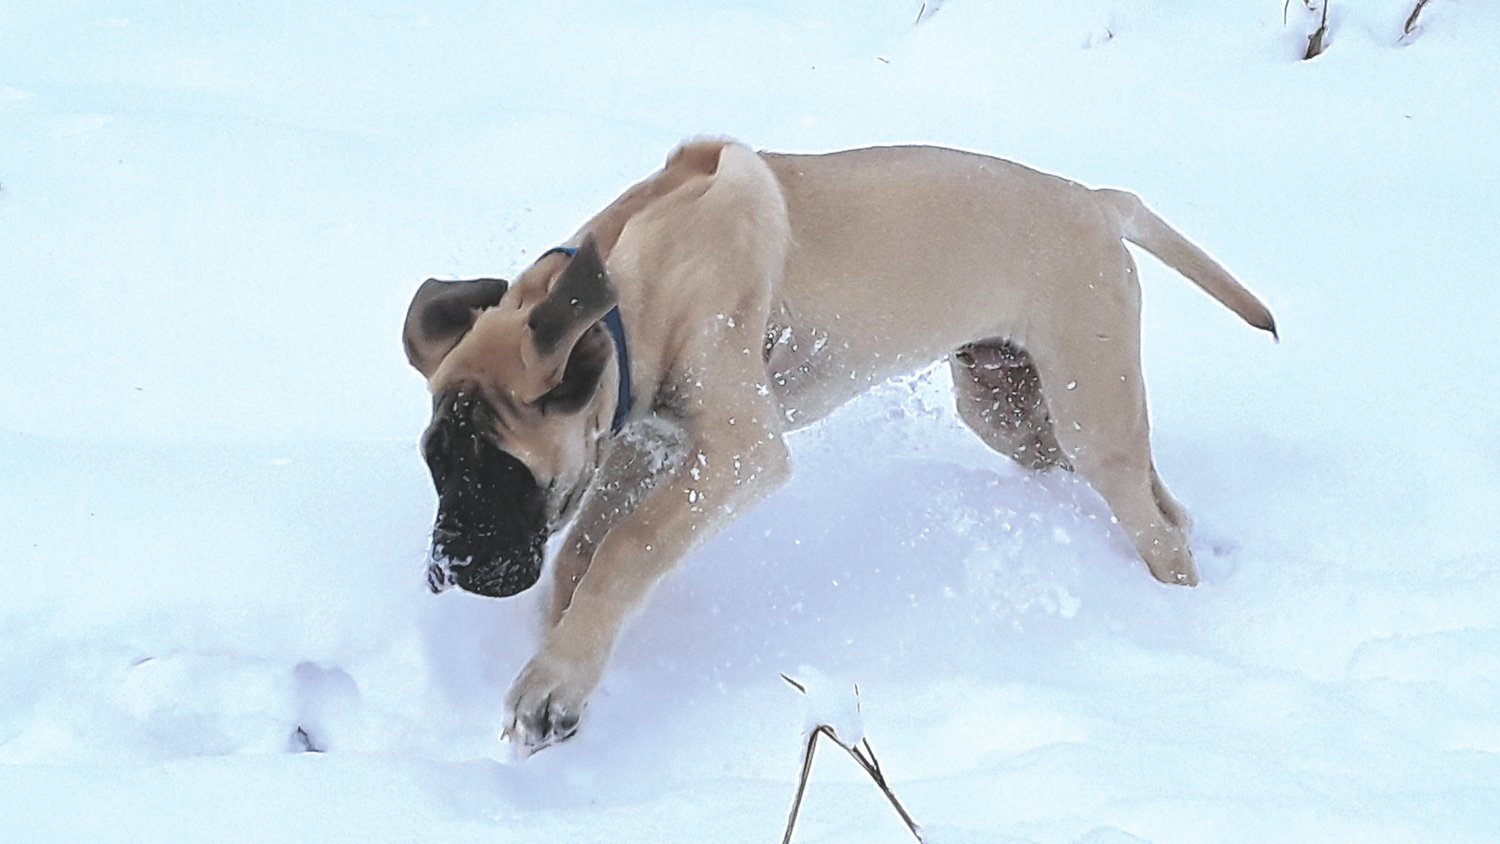 "Four-month-old Raffael 'Raff' the Super Mastiff enjoying his first snow (10" Rochester)," wrote Sharan Linzy, who submitted this photo.